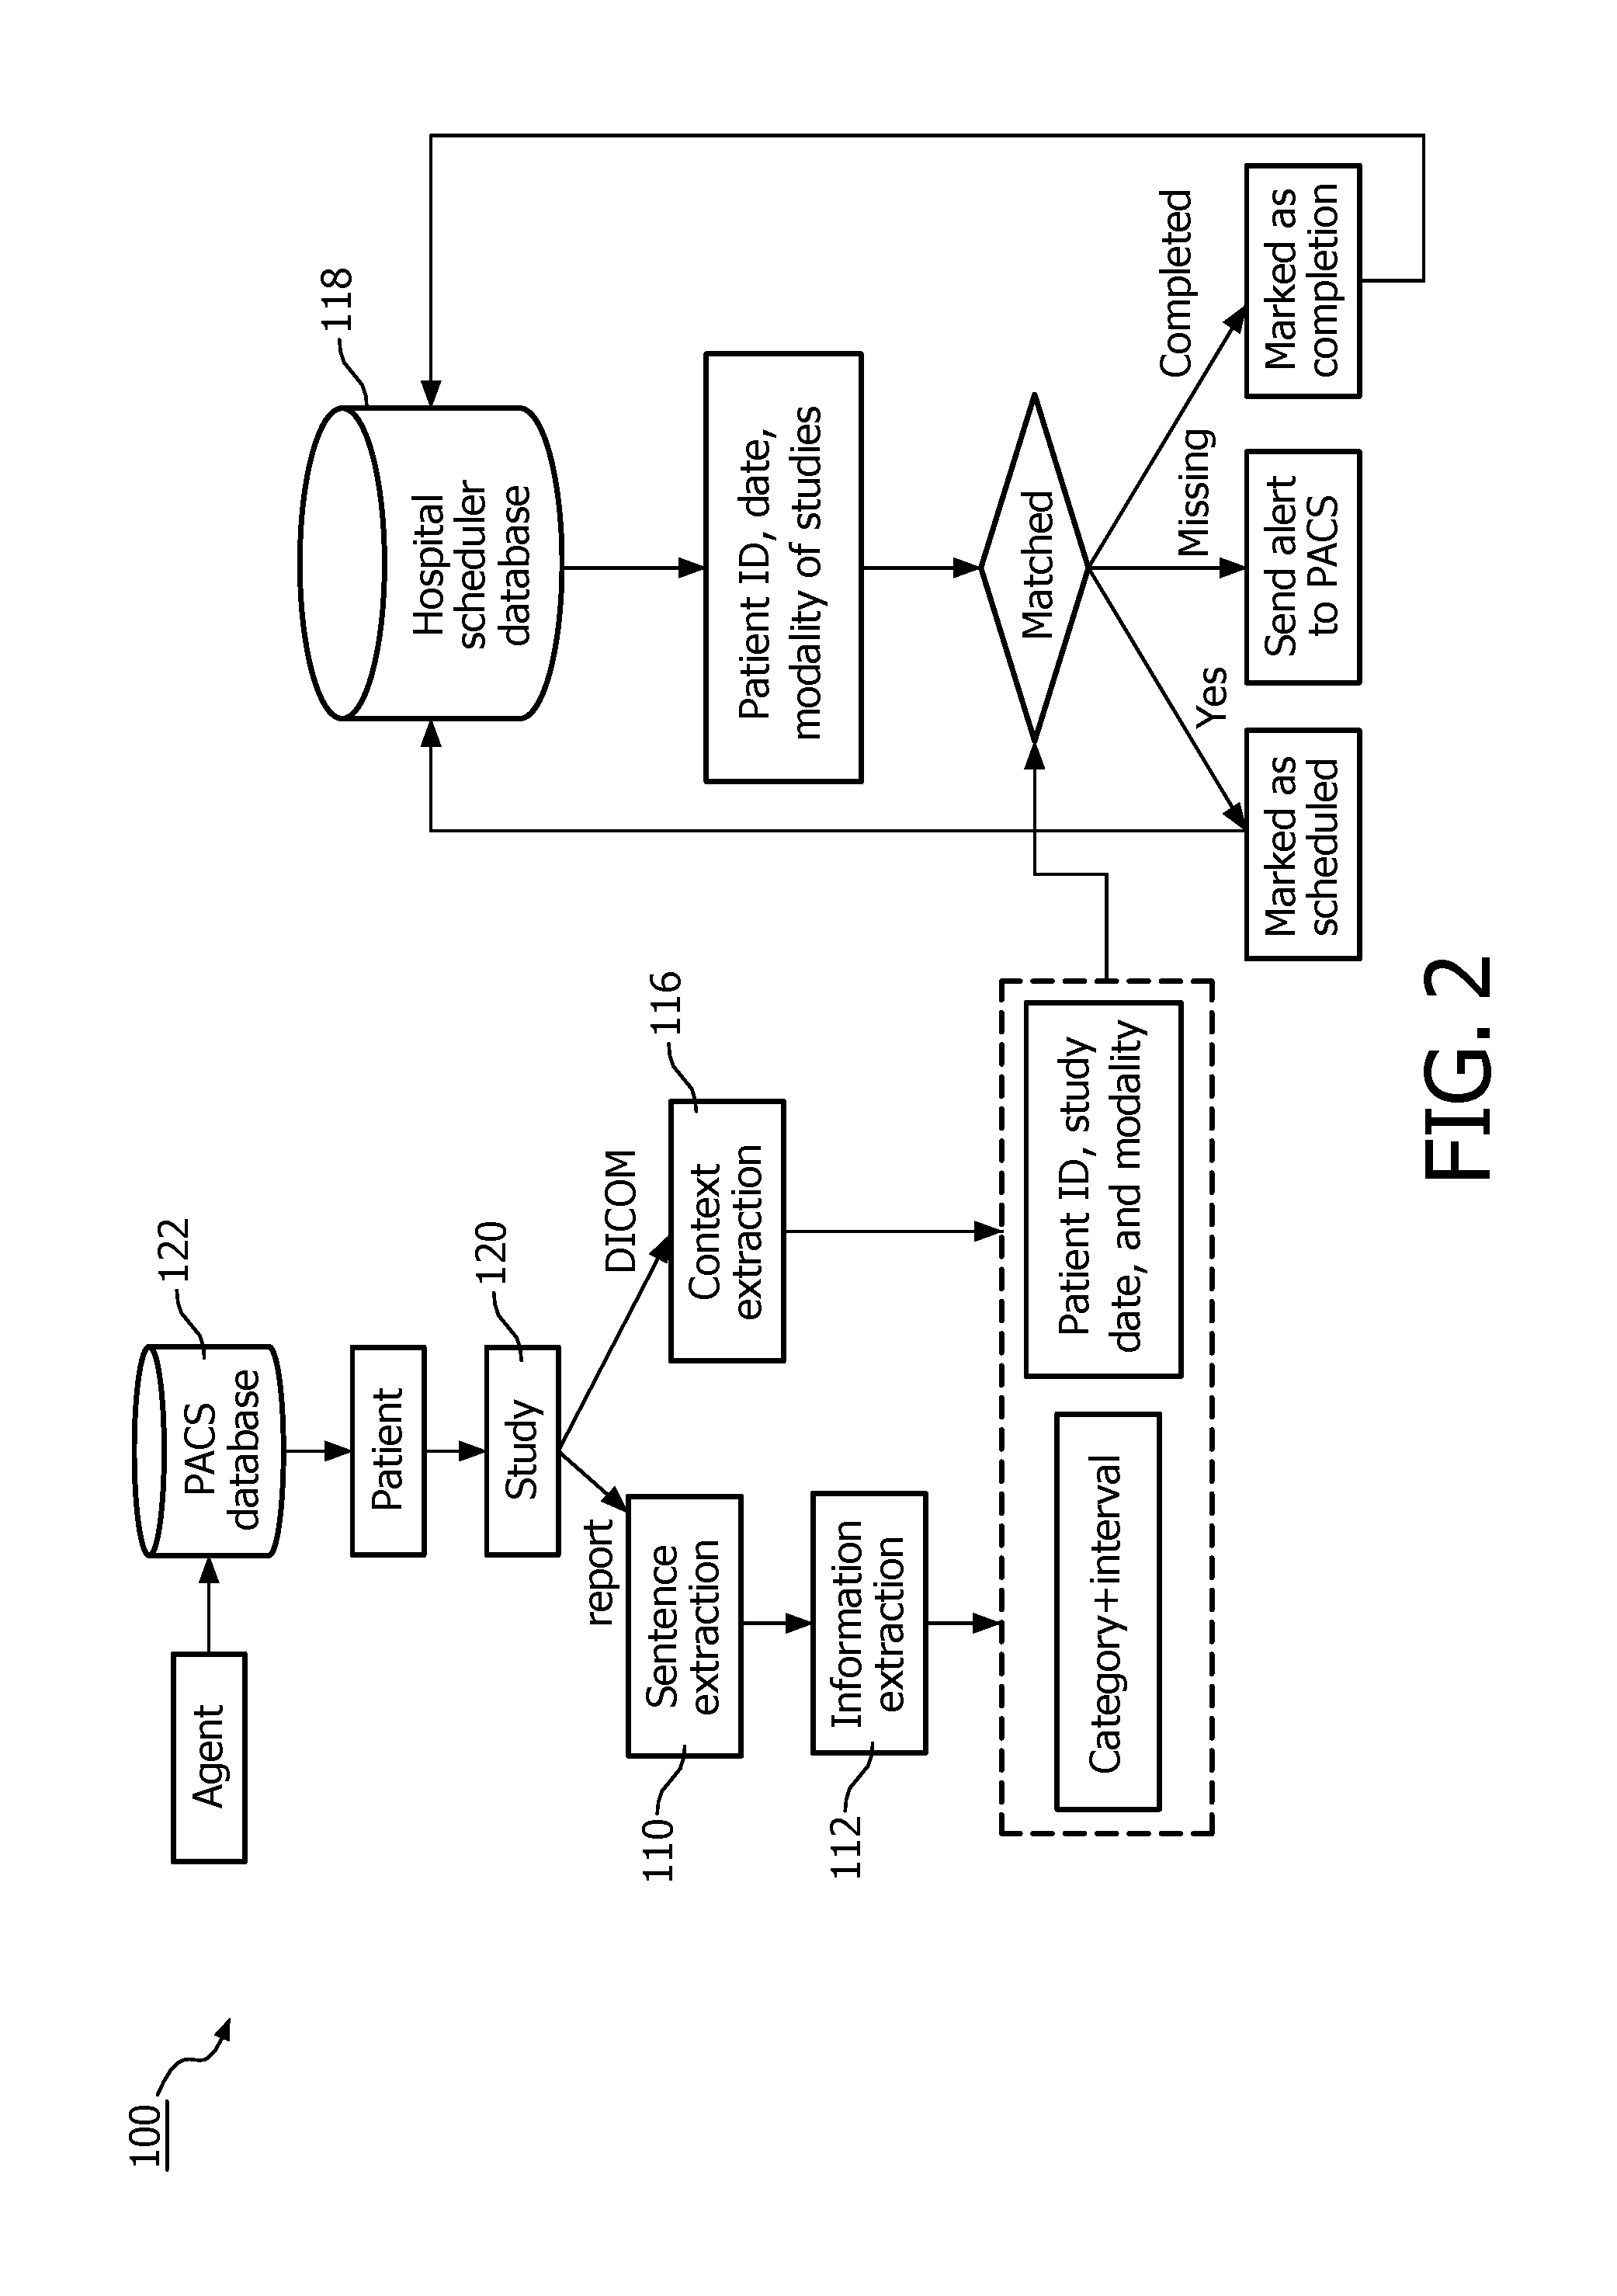 System and method for scheduling healthcare follow-up appointments based on written recommendations